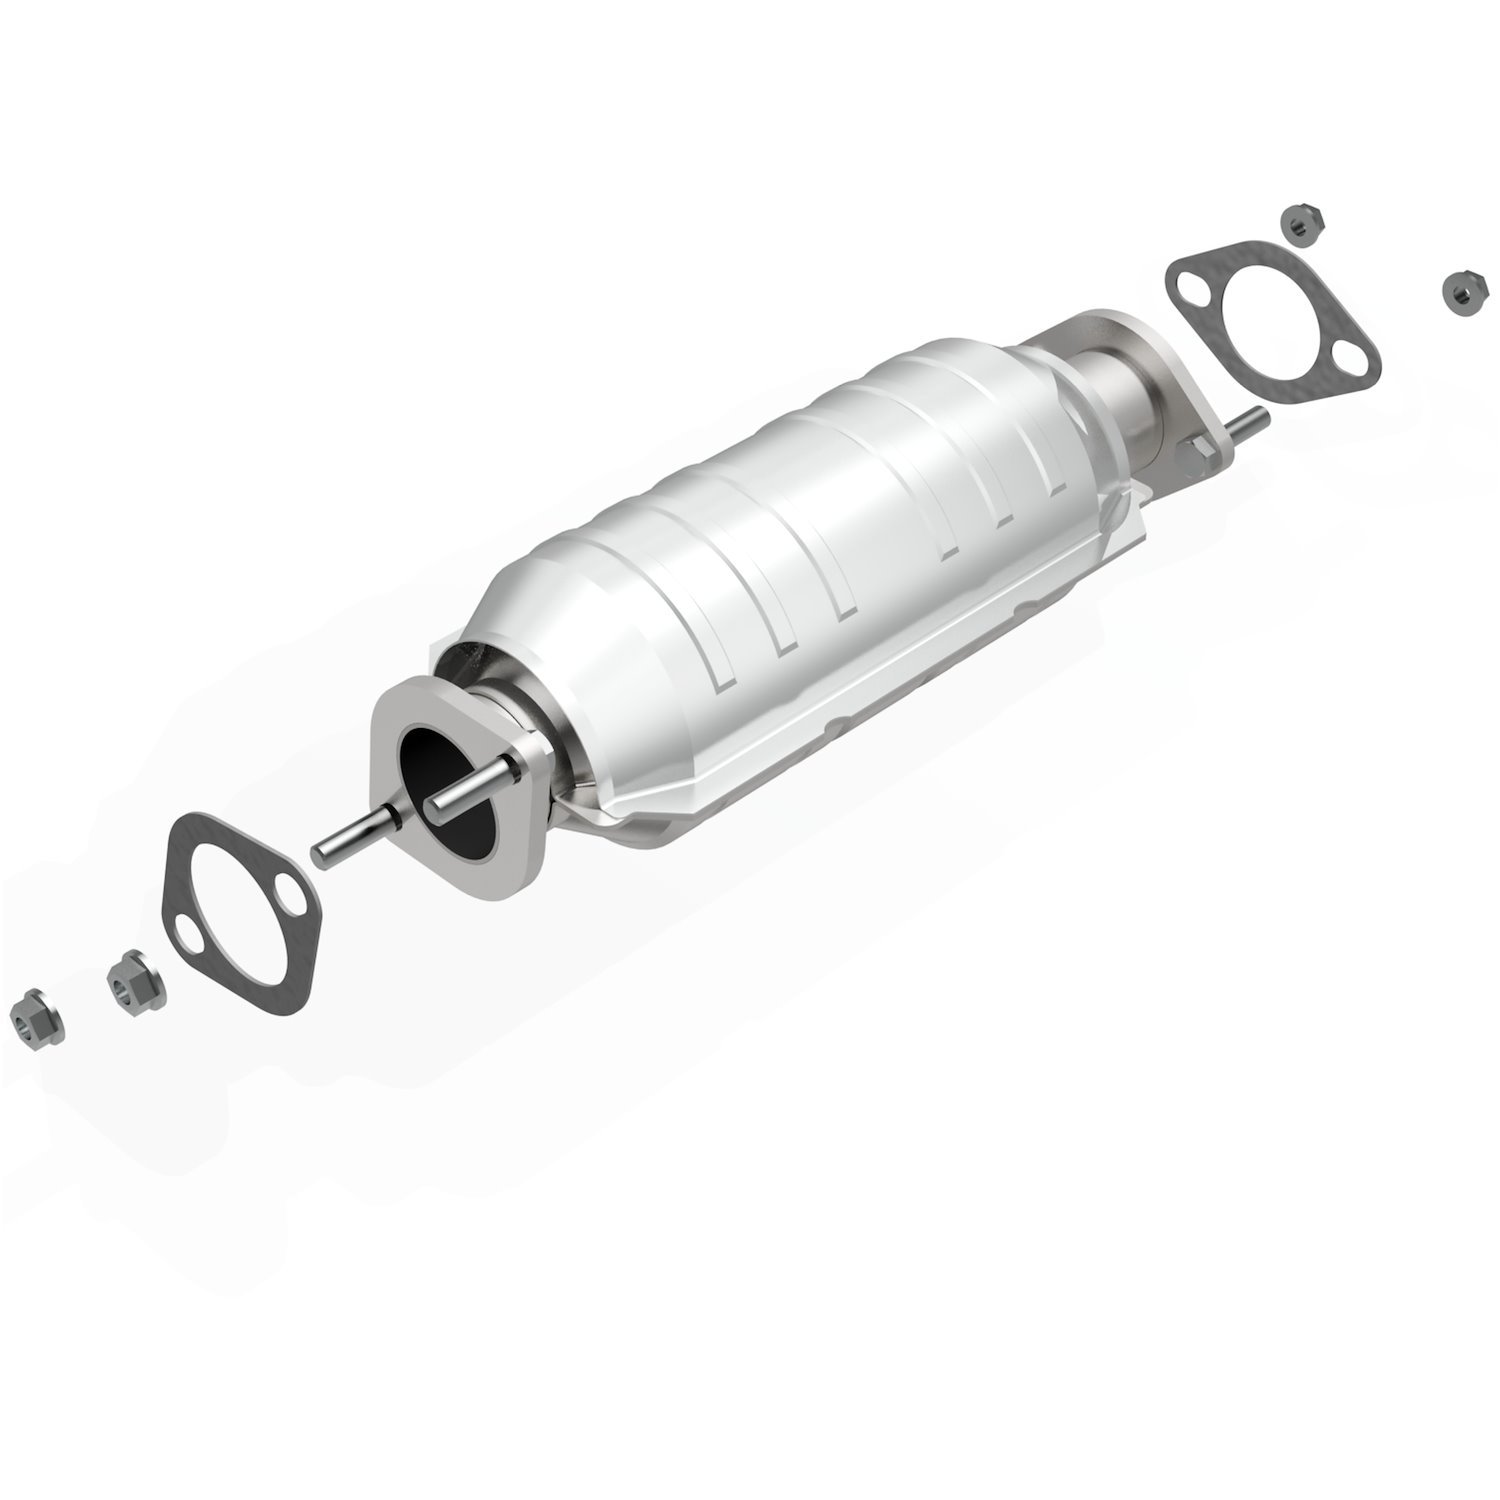 OEM Grade Federal / EPA Compliant Direct-Fit Catalytic Converter 49653